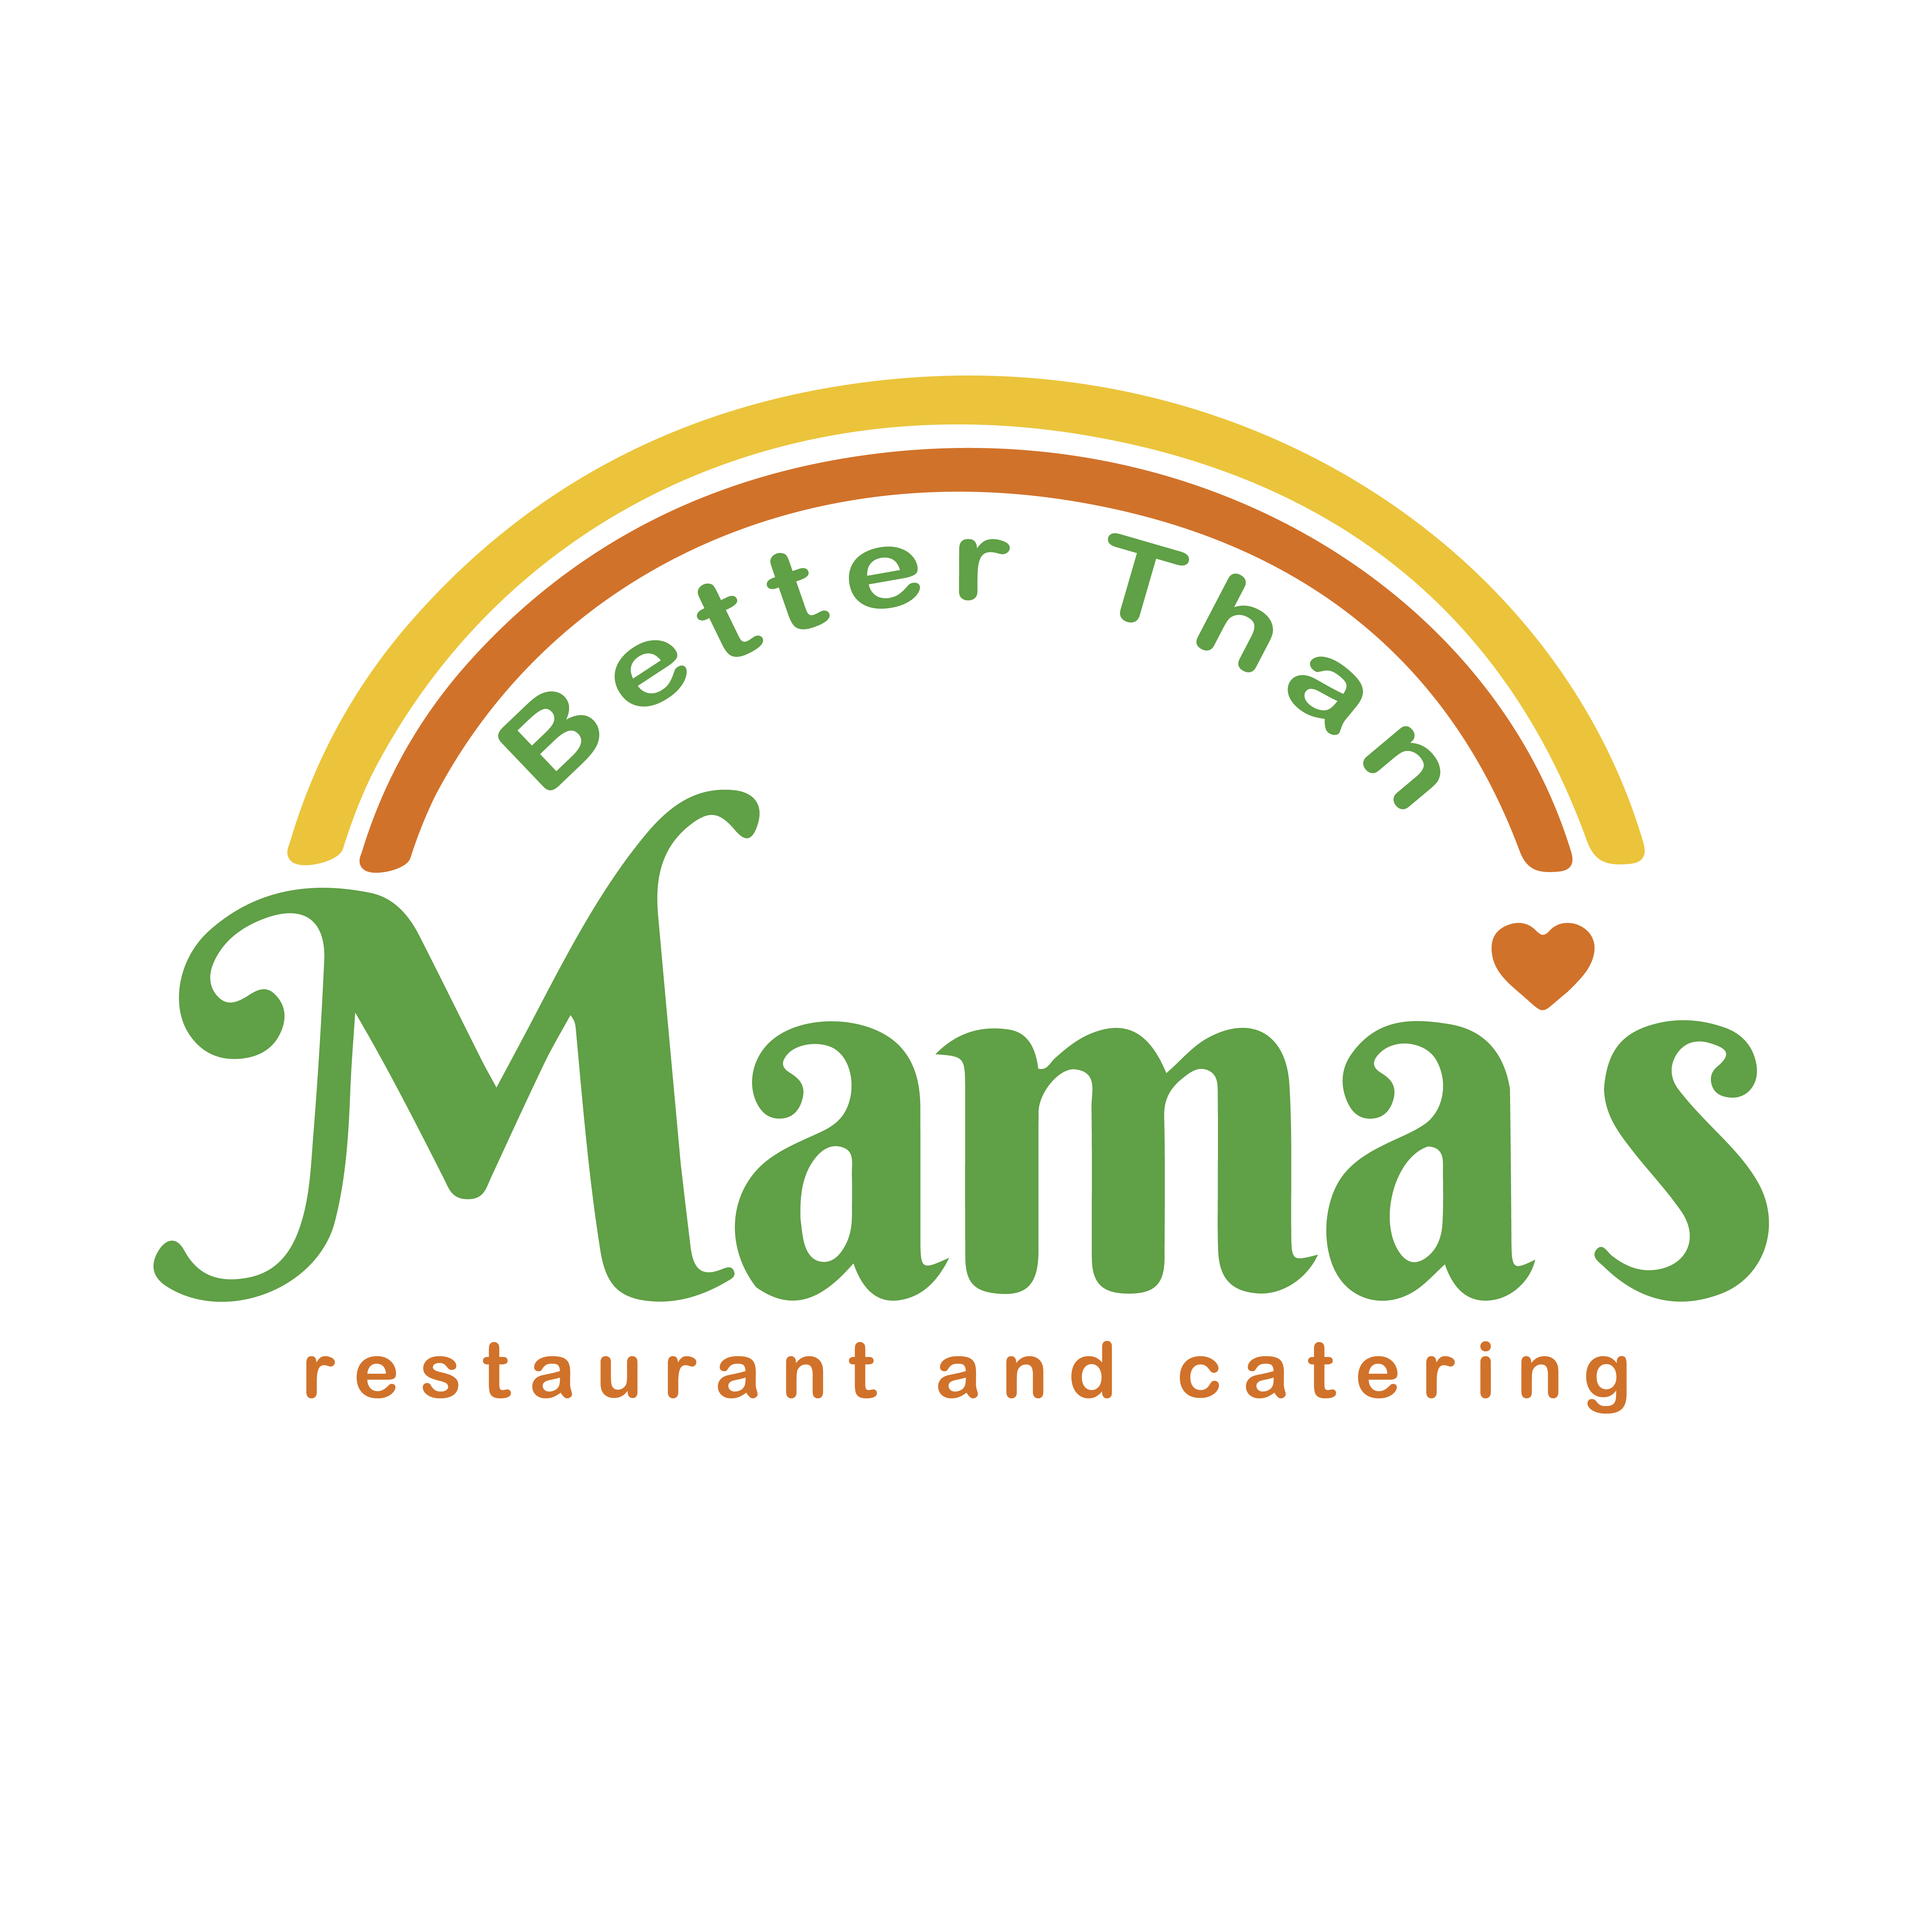 Better Than Mama's